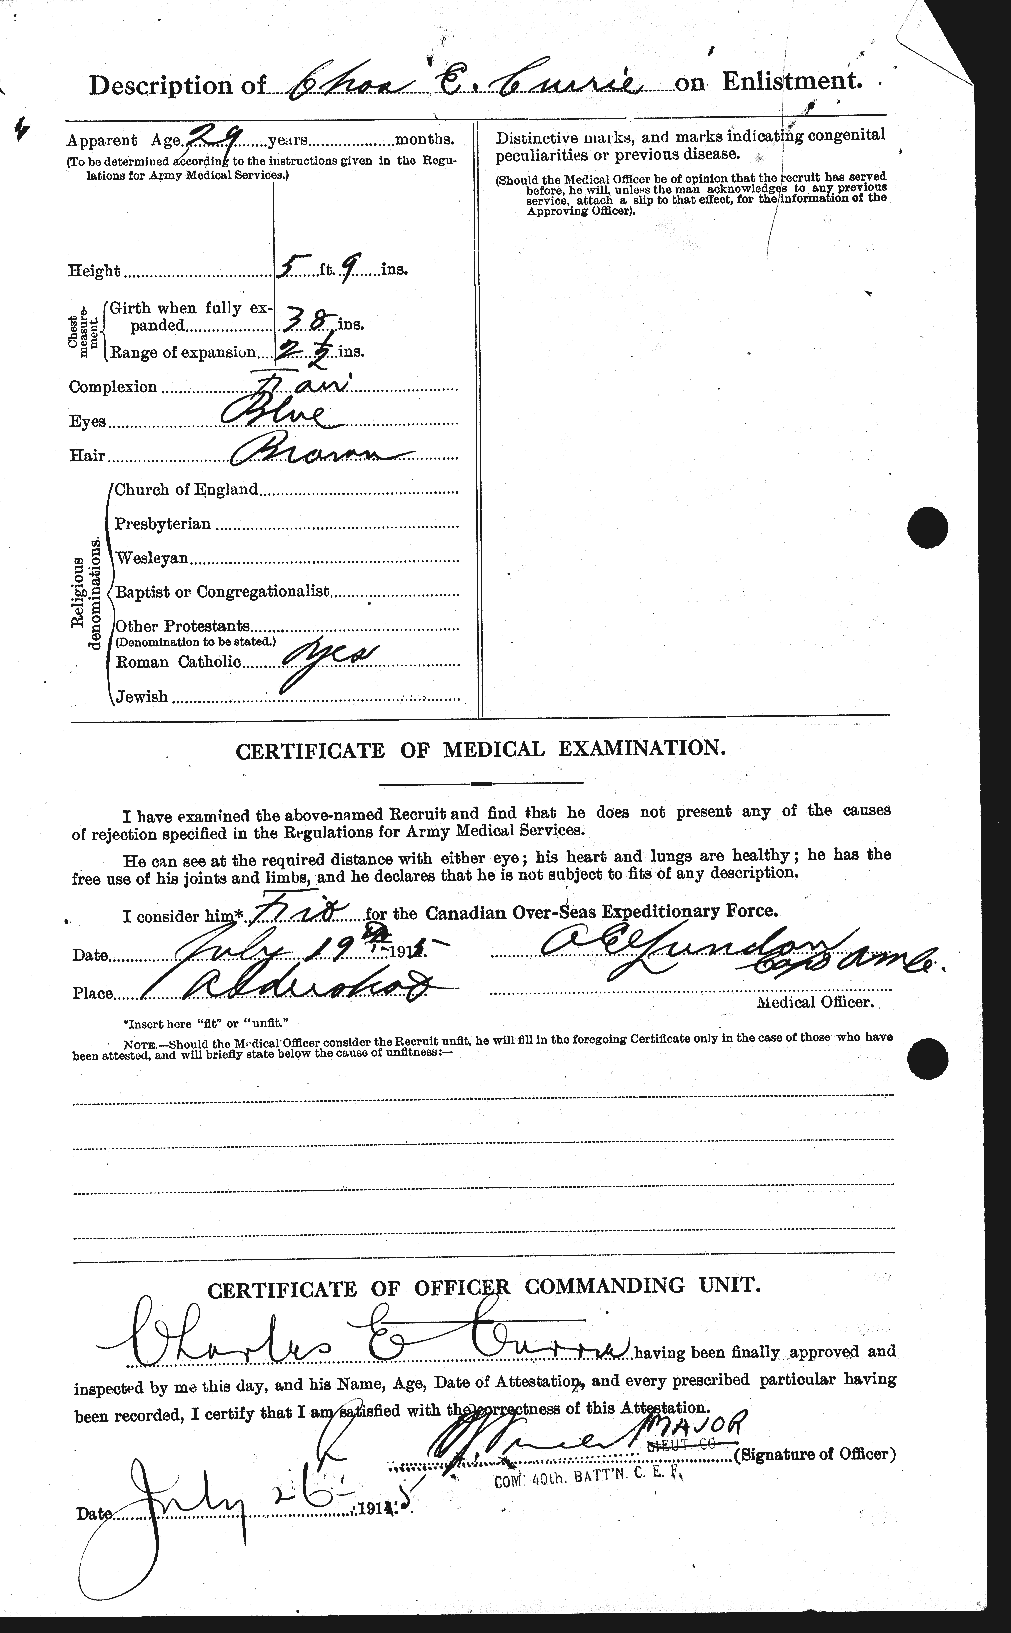 Personnel Records of the First World War - CEF 073054b